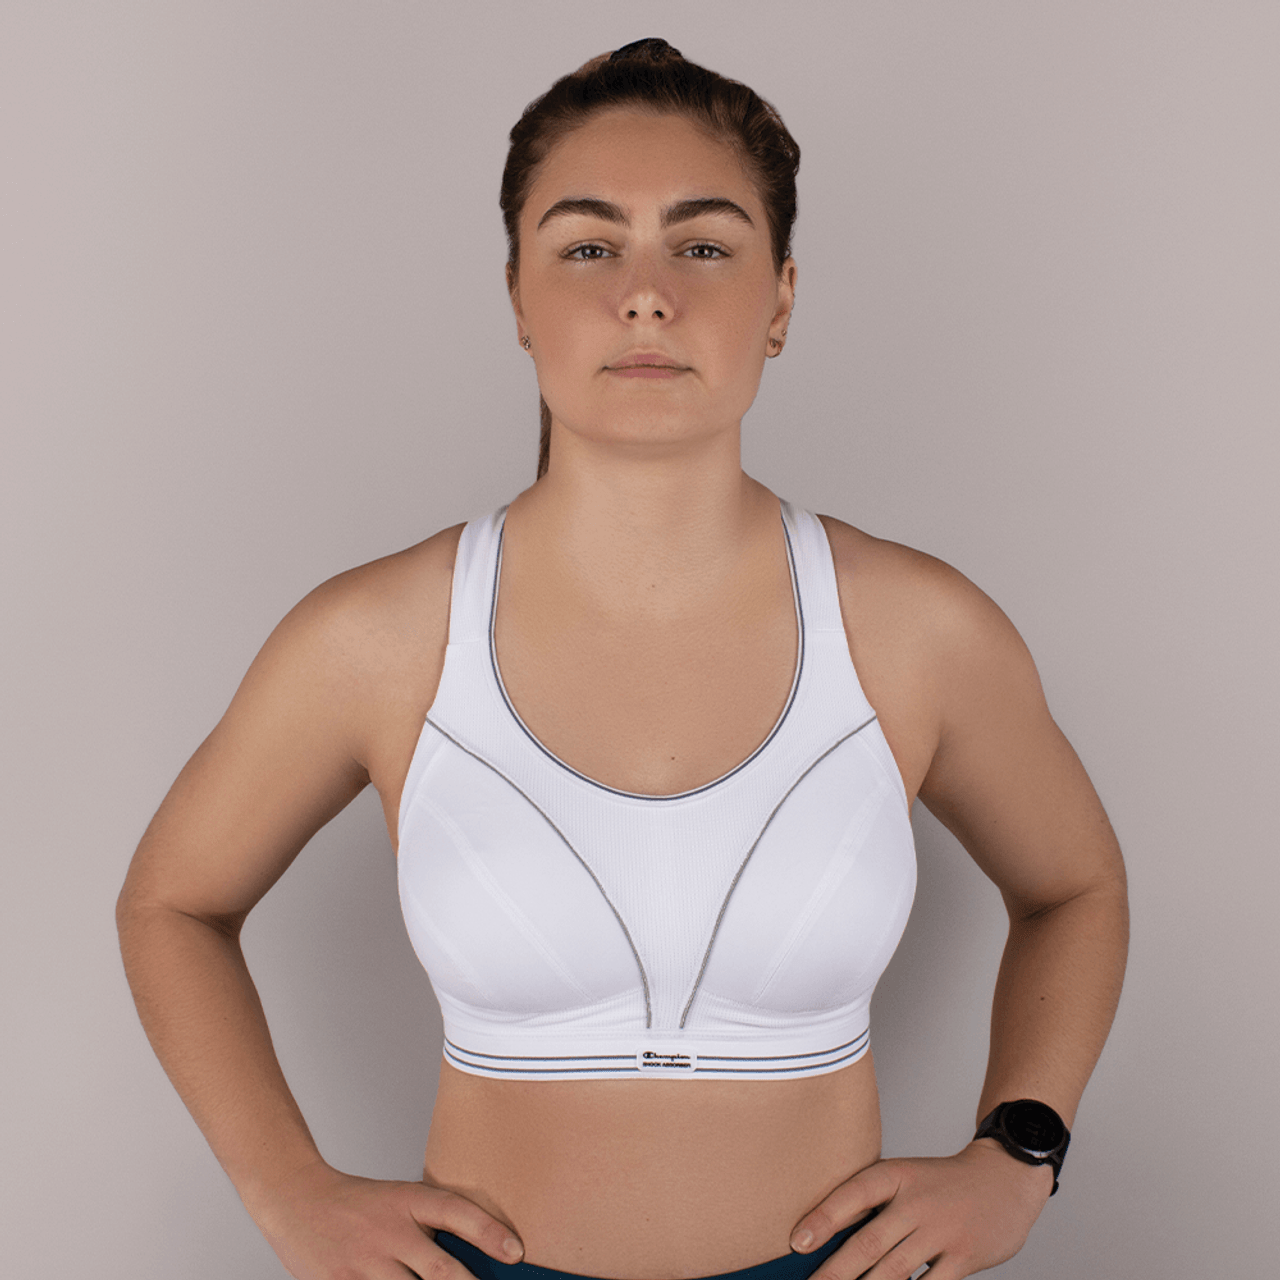 Shock Absorber Ultimate Run extreme high support sports bra in dusty lilac